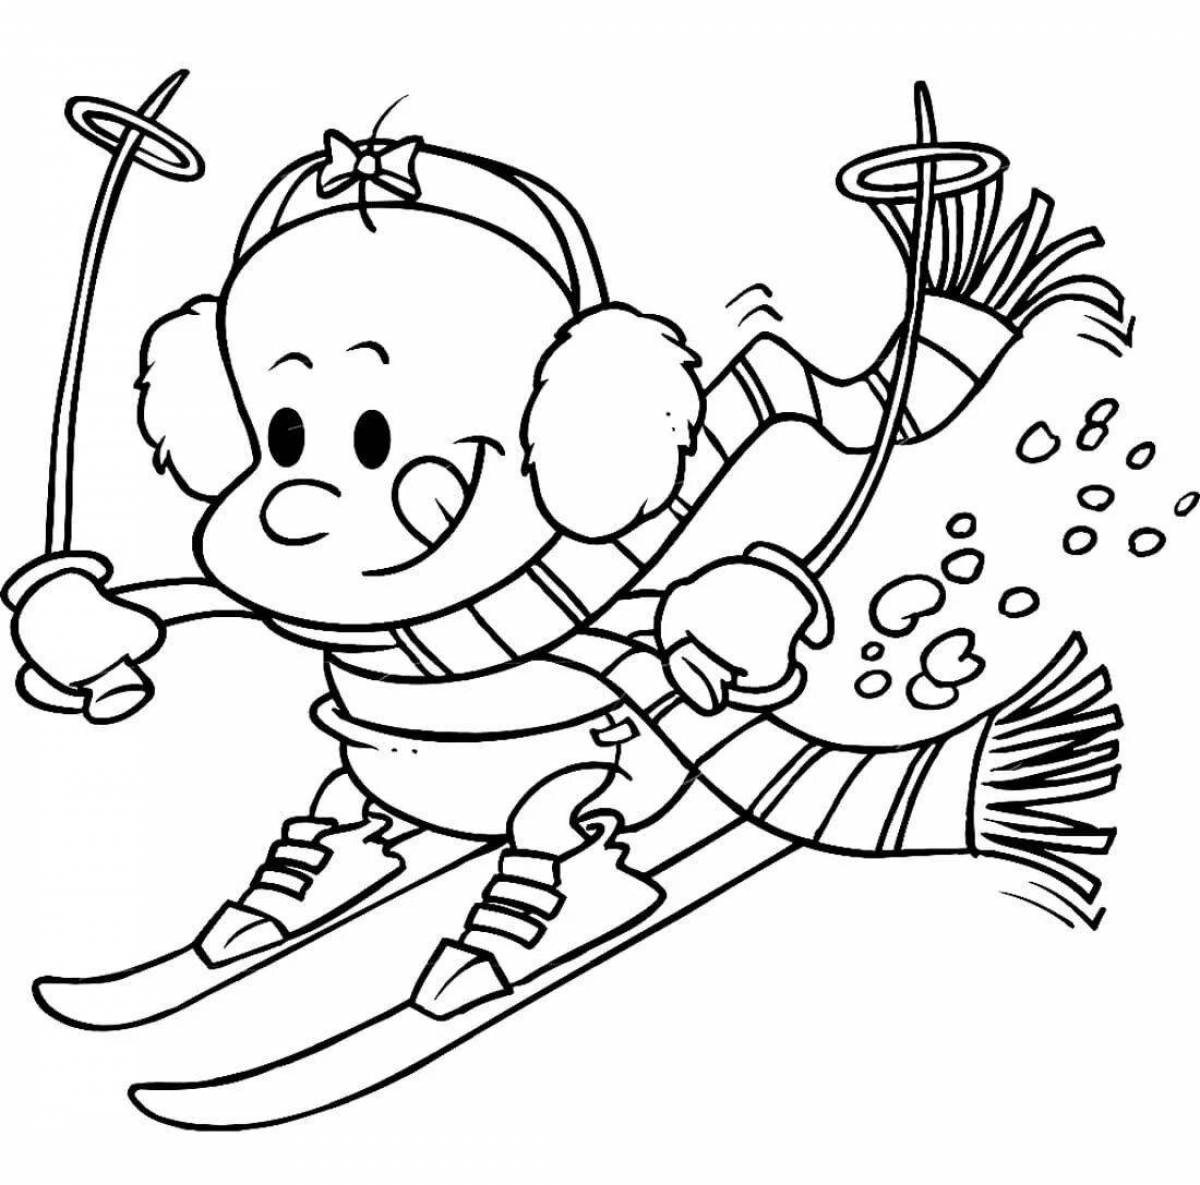 Colorful ski coloring for babies